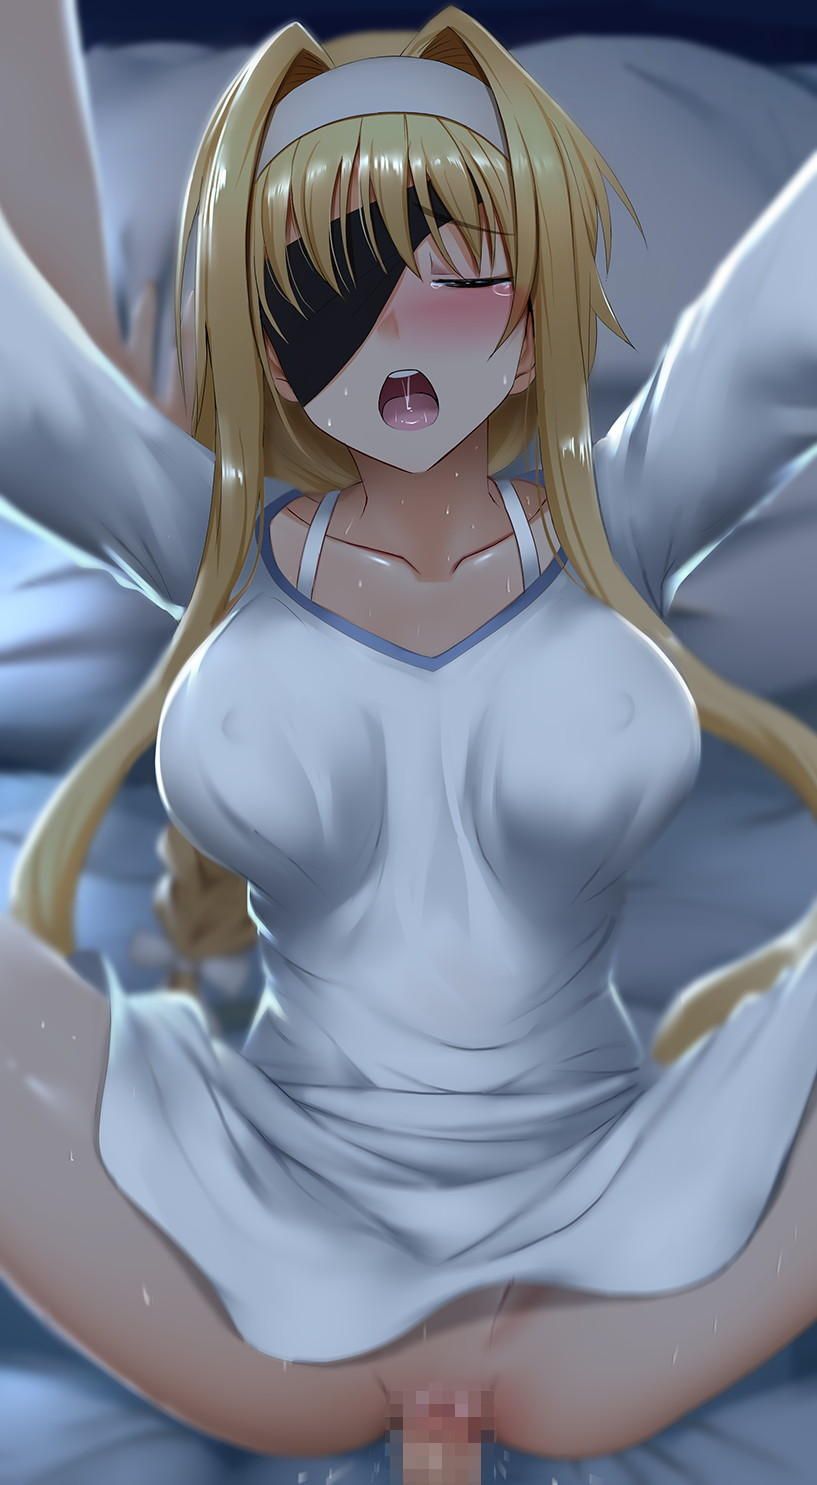 【Secondary Erotic】Here is the erotic image of Alice appearing in Sword Art Online 19